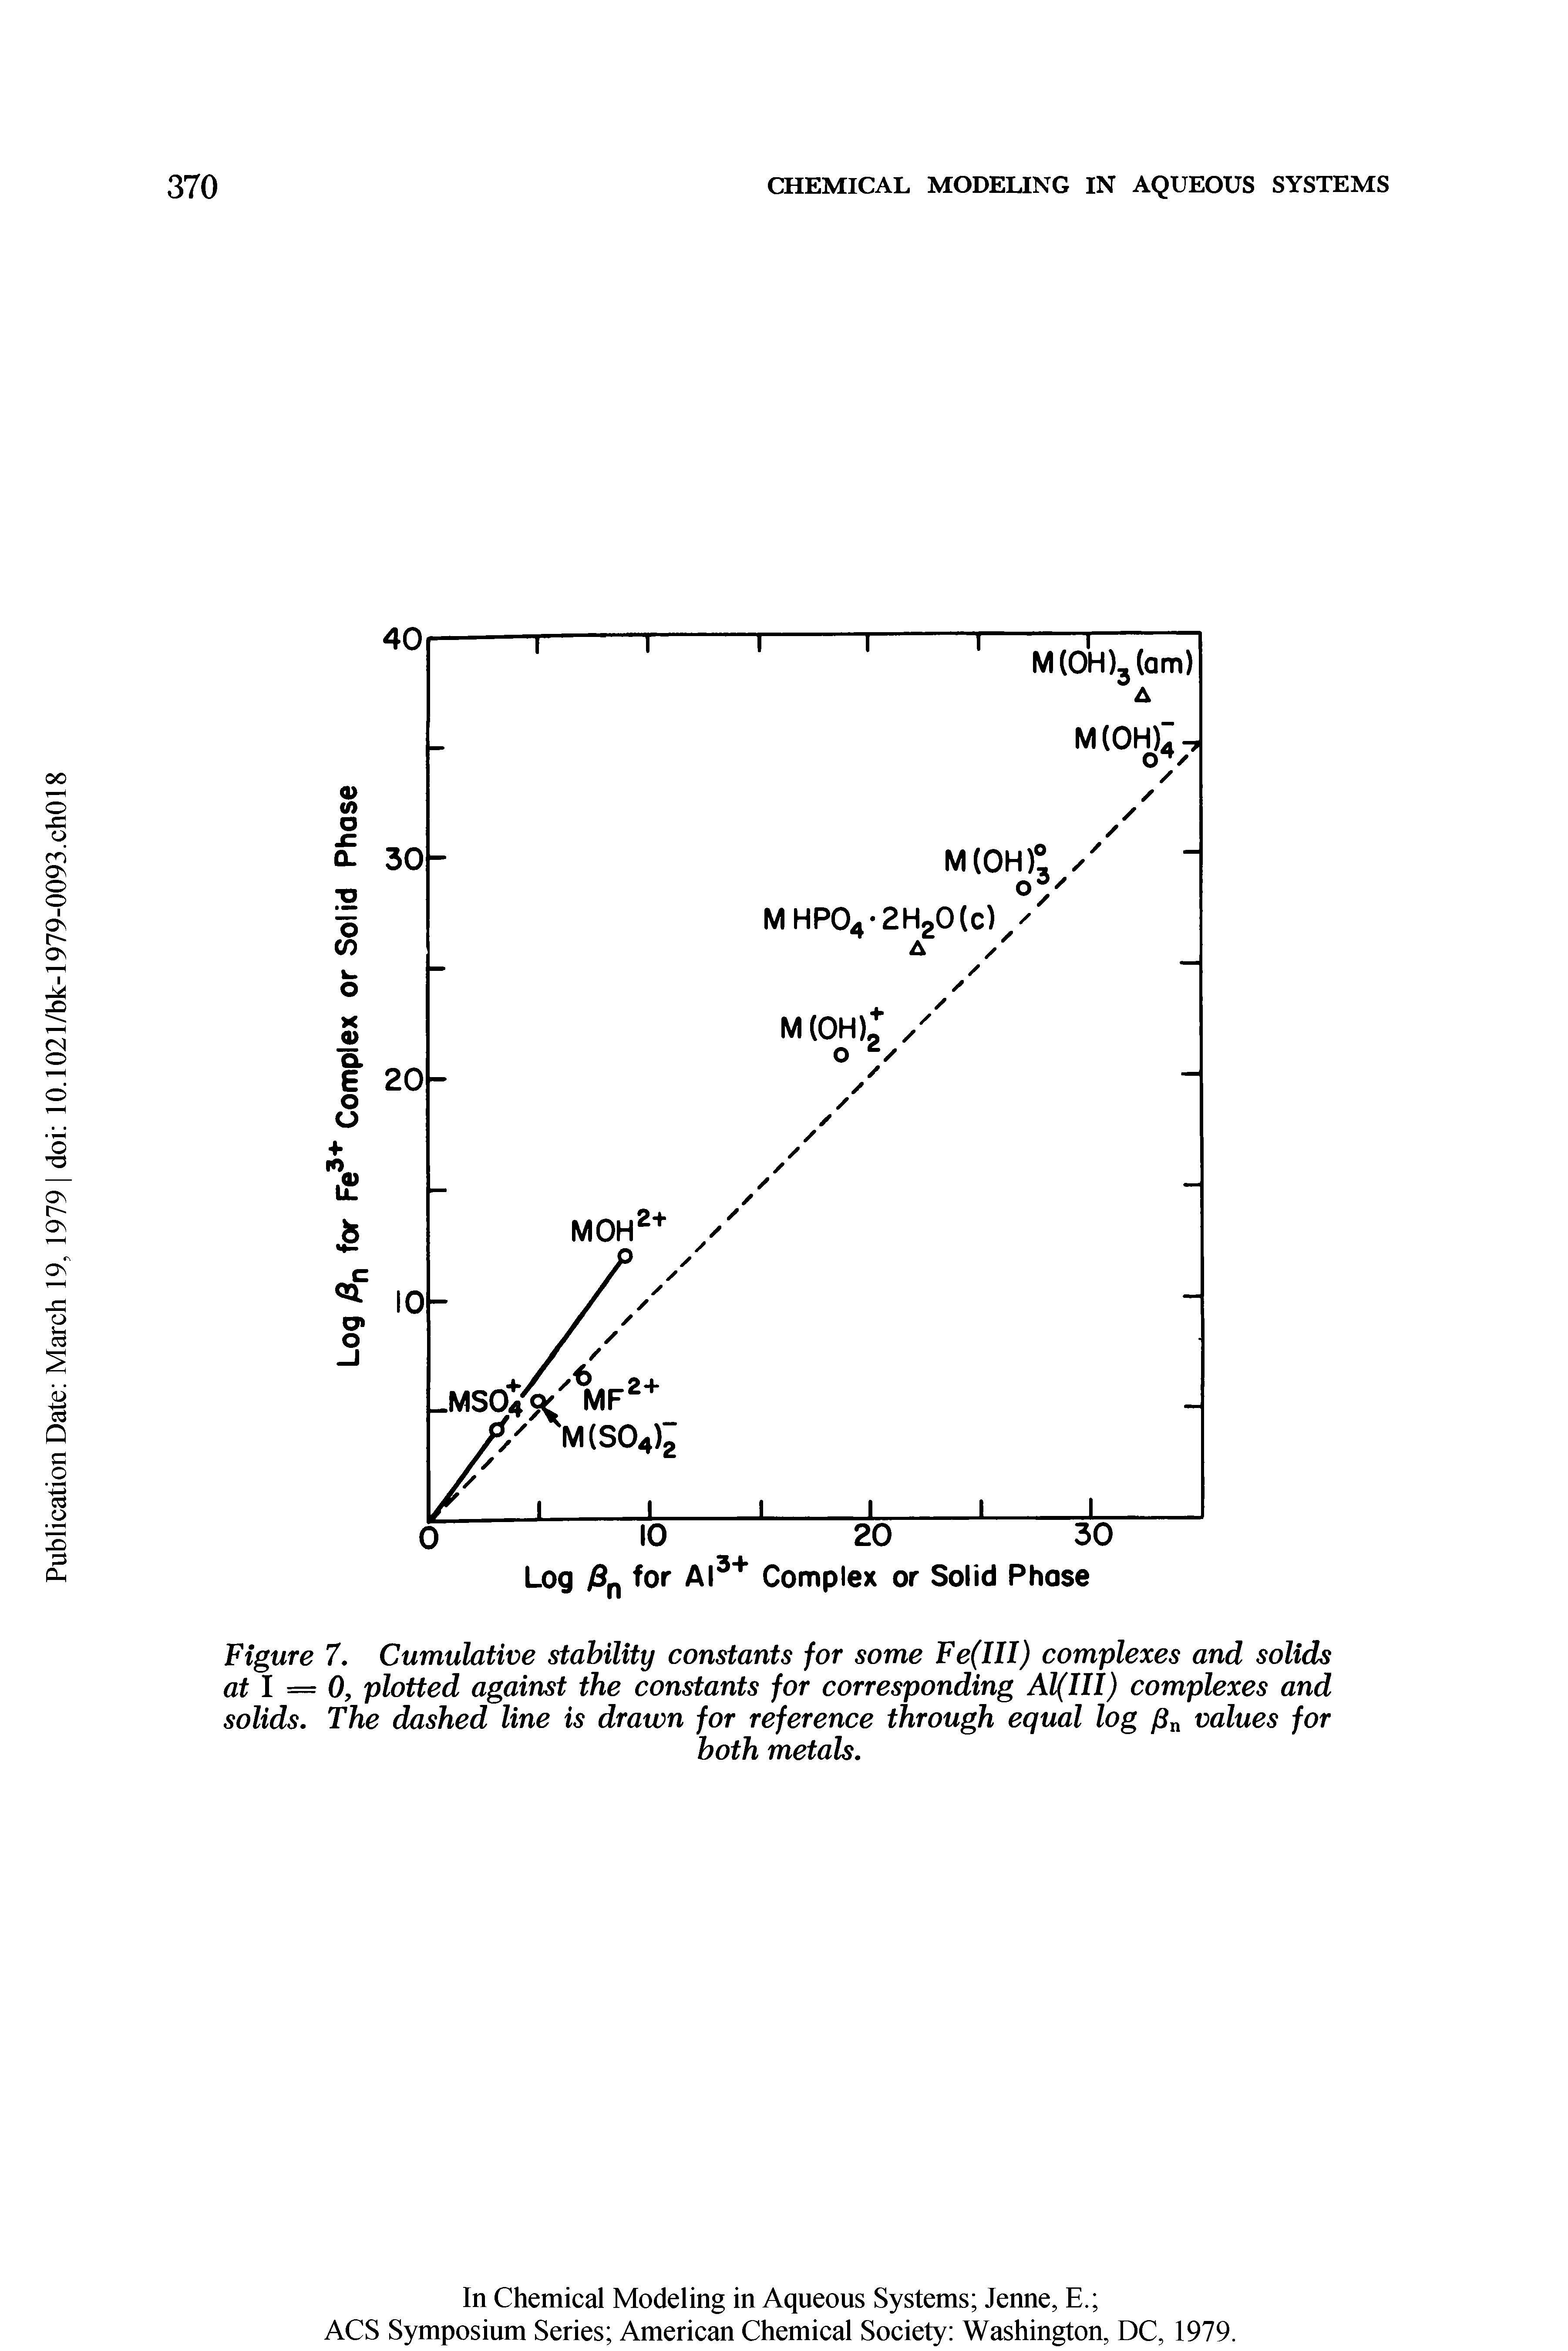 Figure 7. Cumulative stability constants for some Fe(III) complexes and solids at I = 0, plotted against the constants for corresponding Al(lll) complexes and solids. The dashed line is drawn for reference through equal log values for...